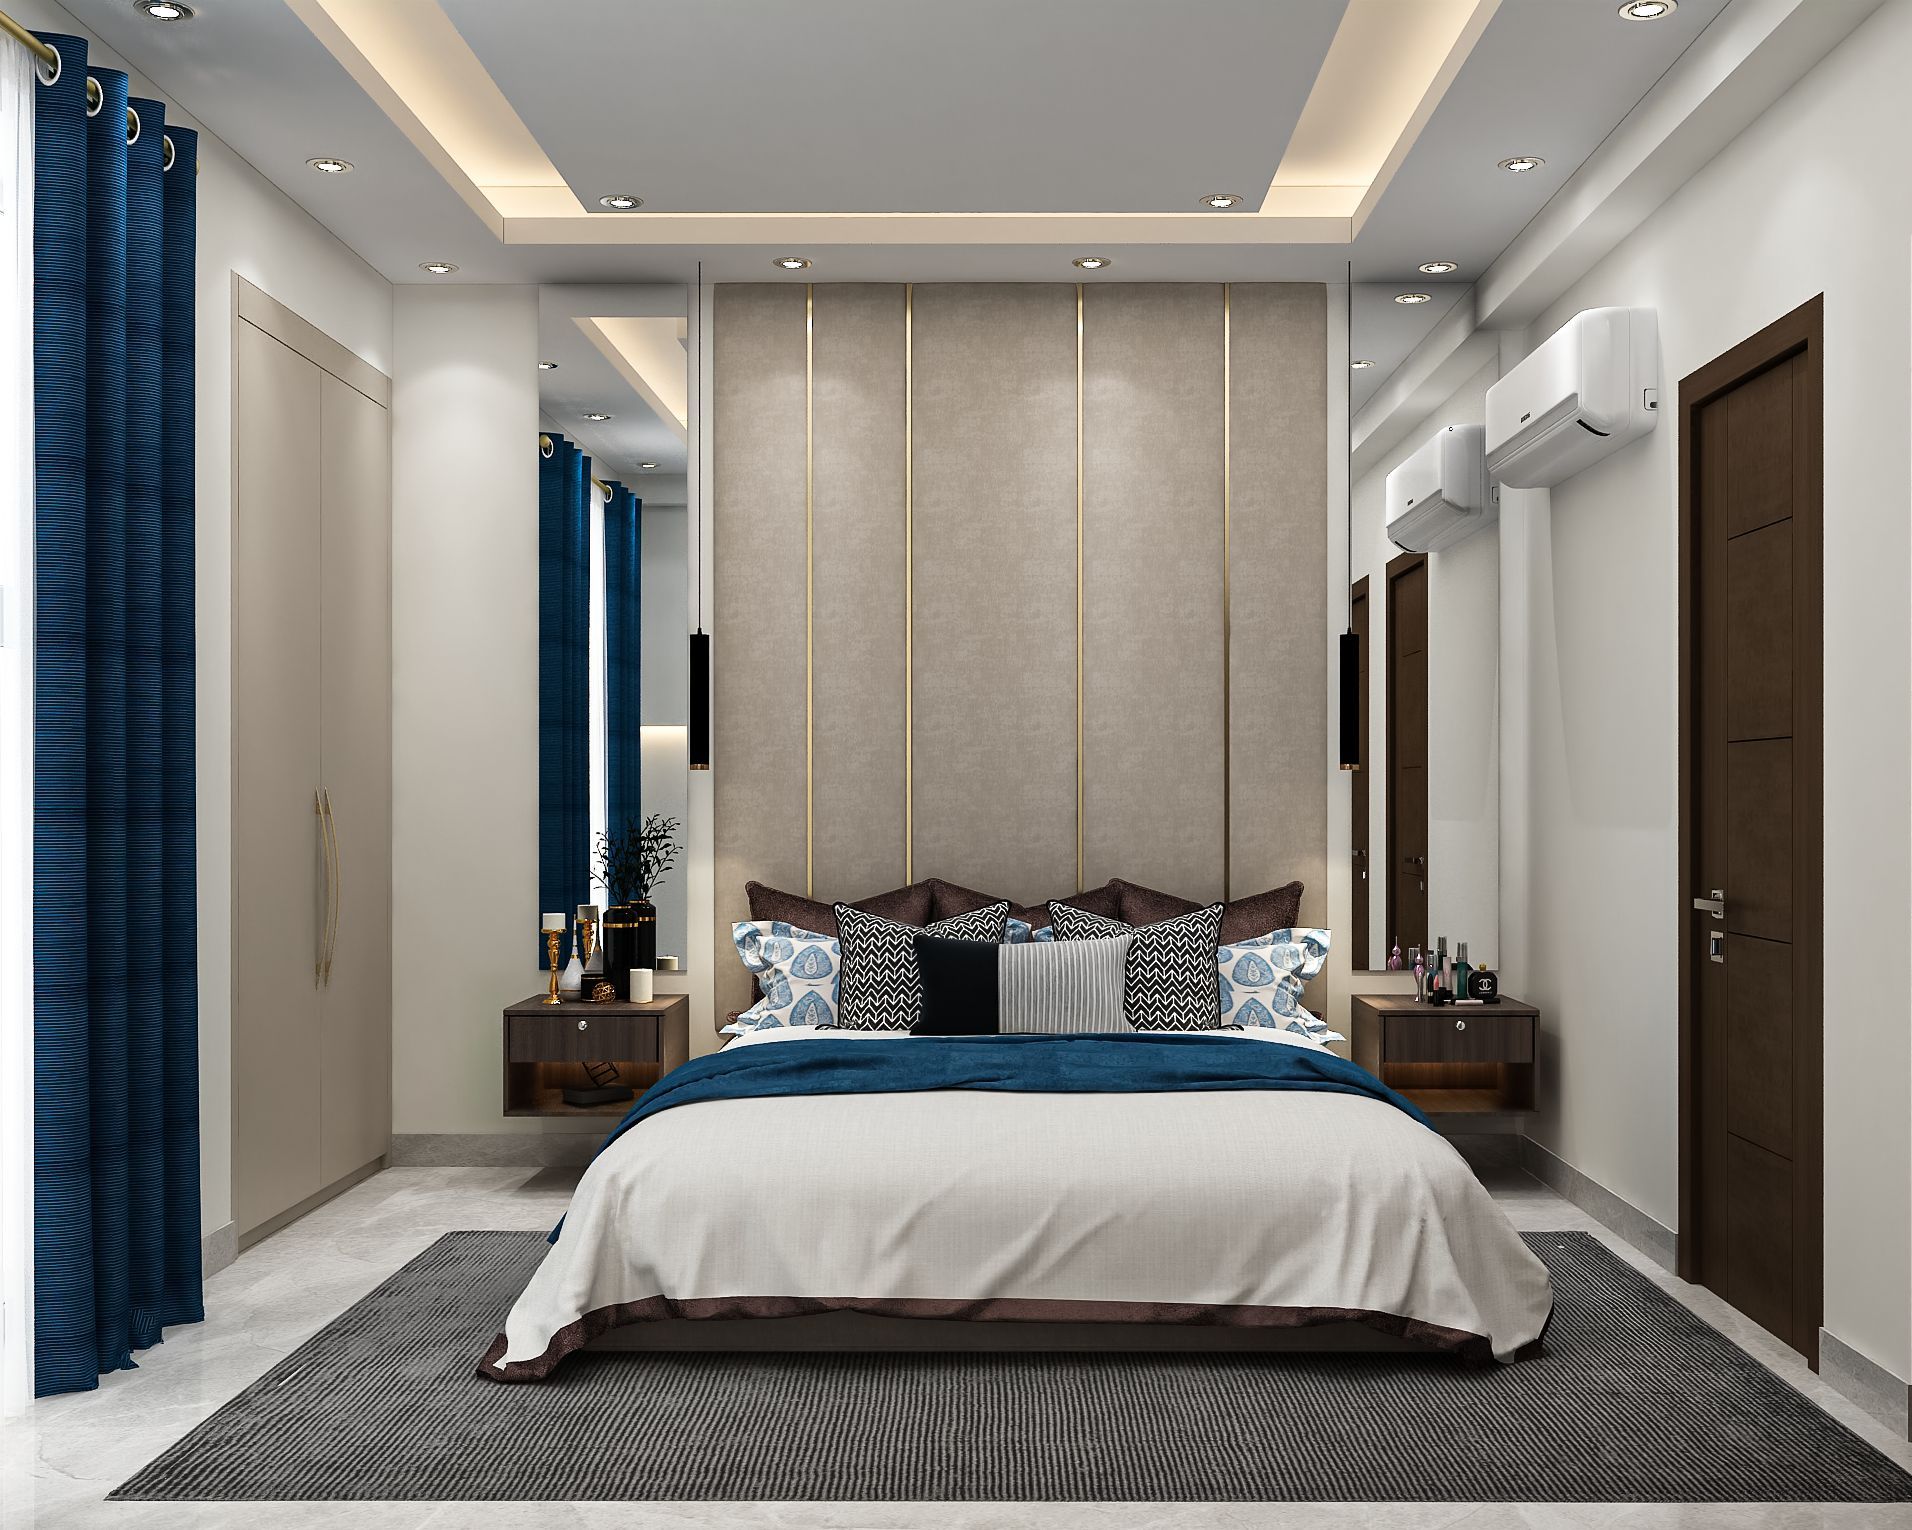 Contemporary Single-Layered Gypsum Ceiling Design With Recessed Lights